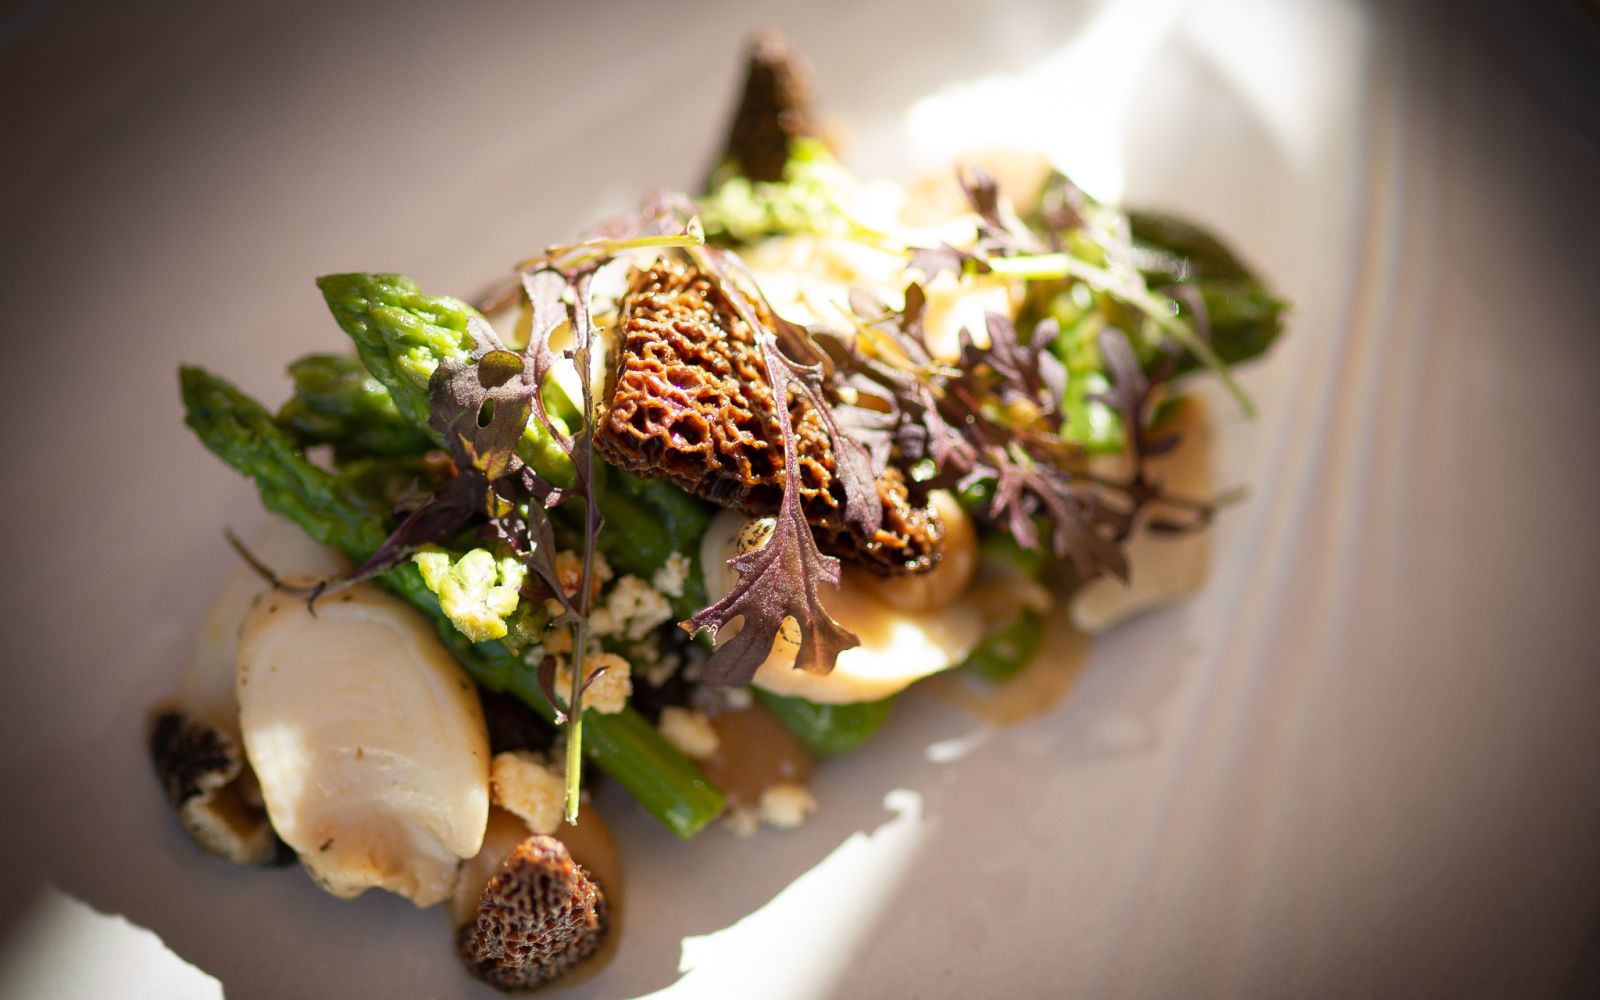 A Plate Of Food With Asparagus, morels and razor clams